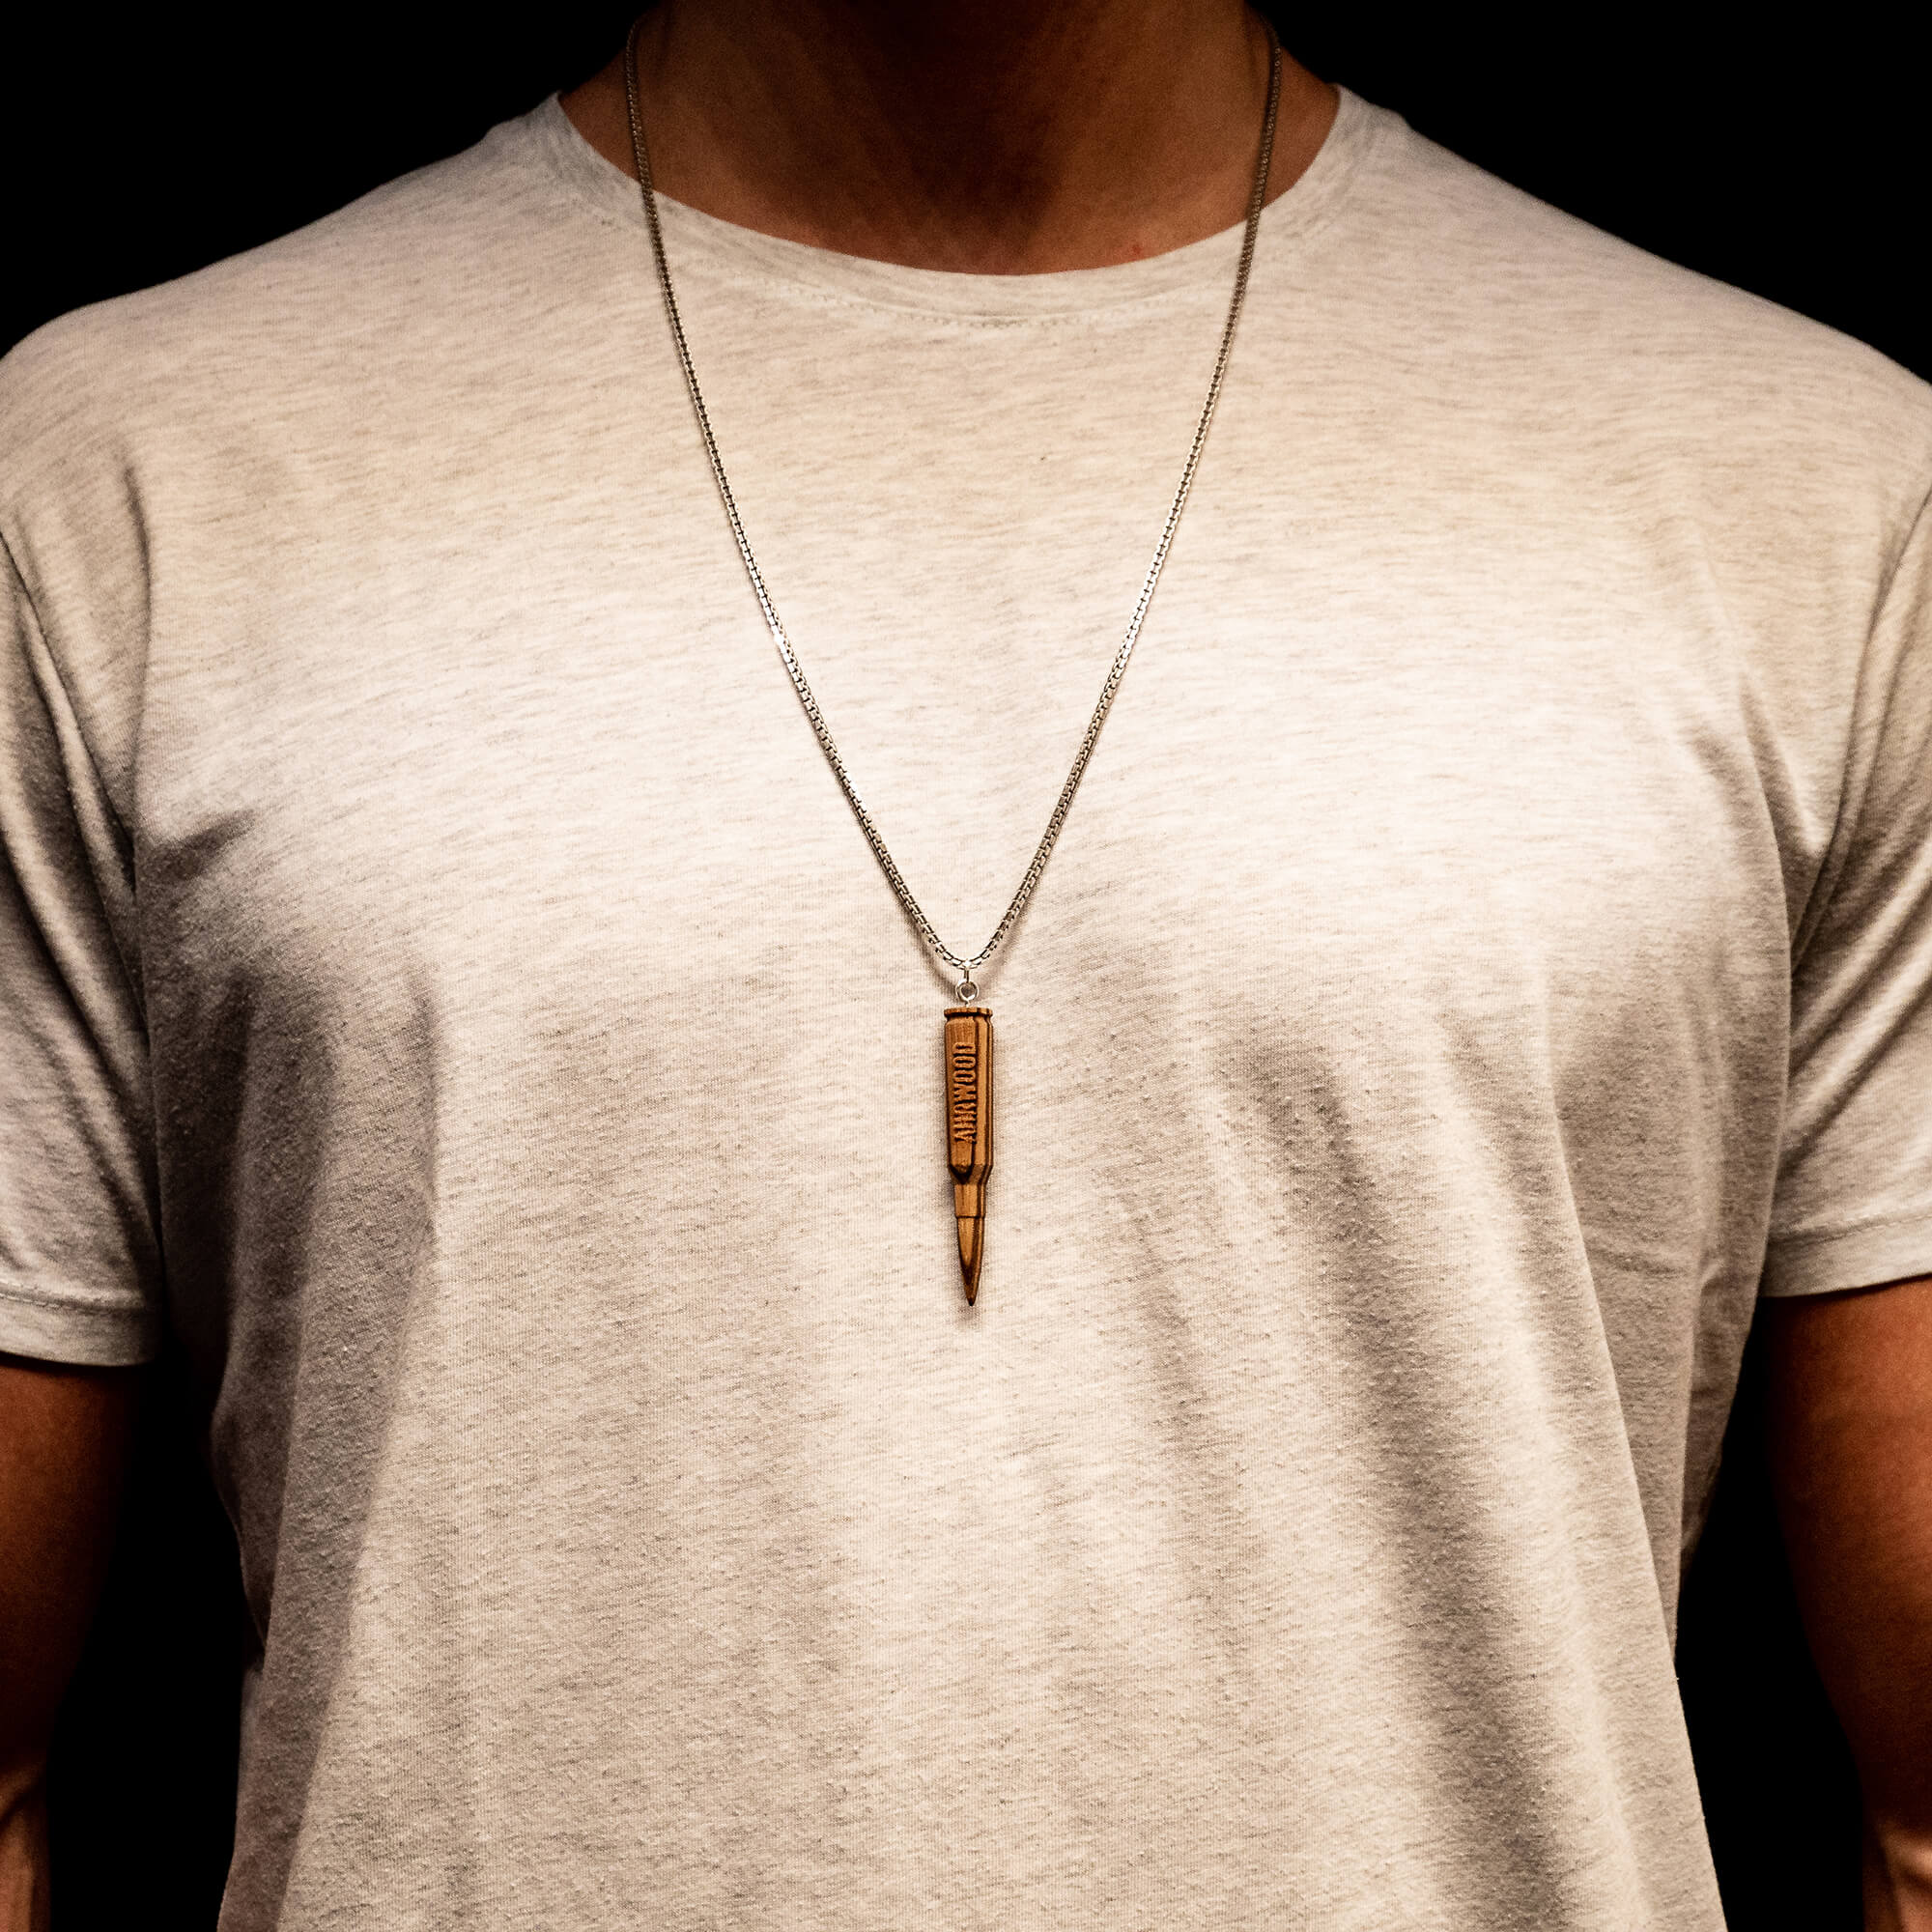 Necklace "AW-47" | Necklace made of wood stylish Accessoire for everyday | Necklace of 925 Sterling Silver